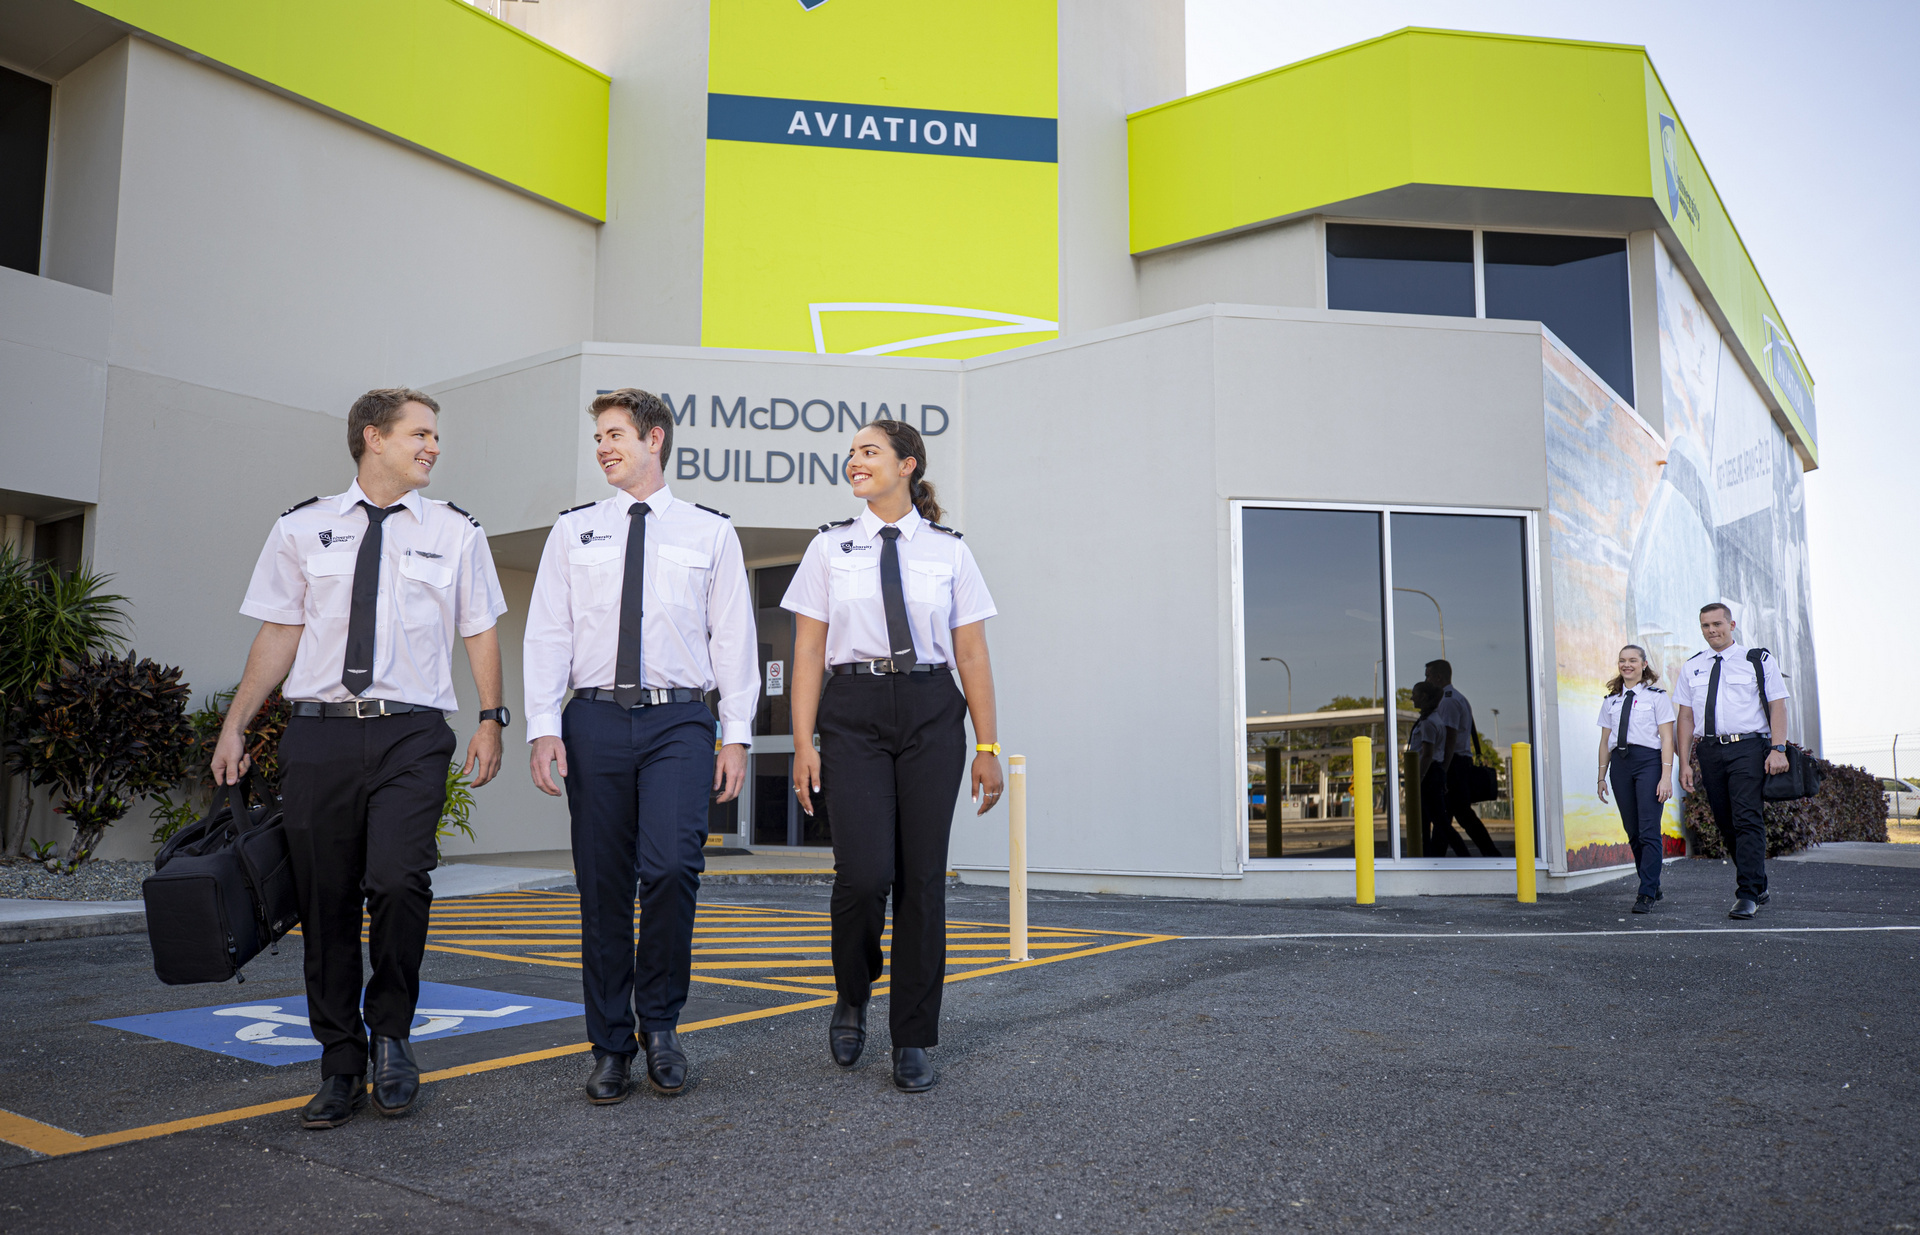 Central Queensland University aviation students exiting the campus